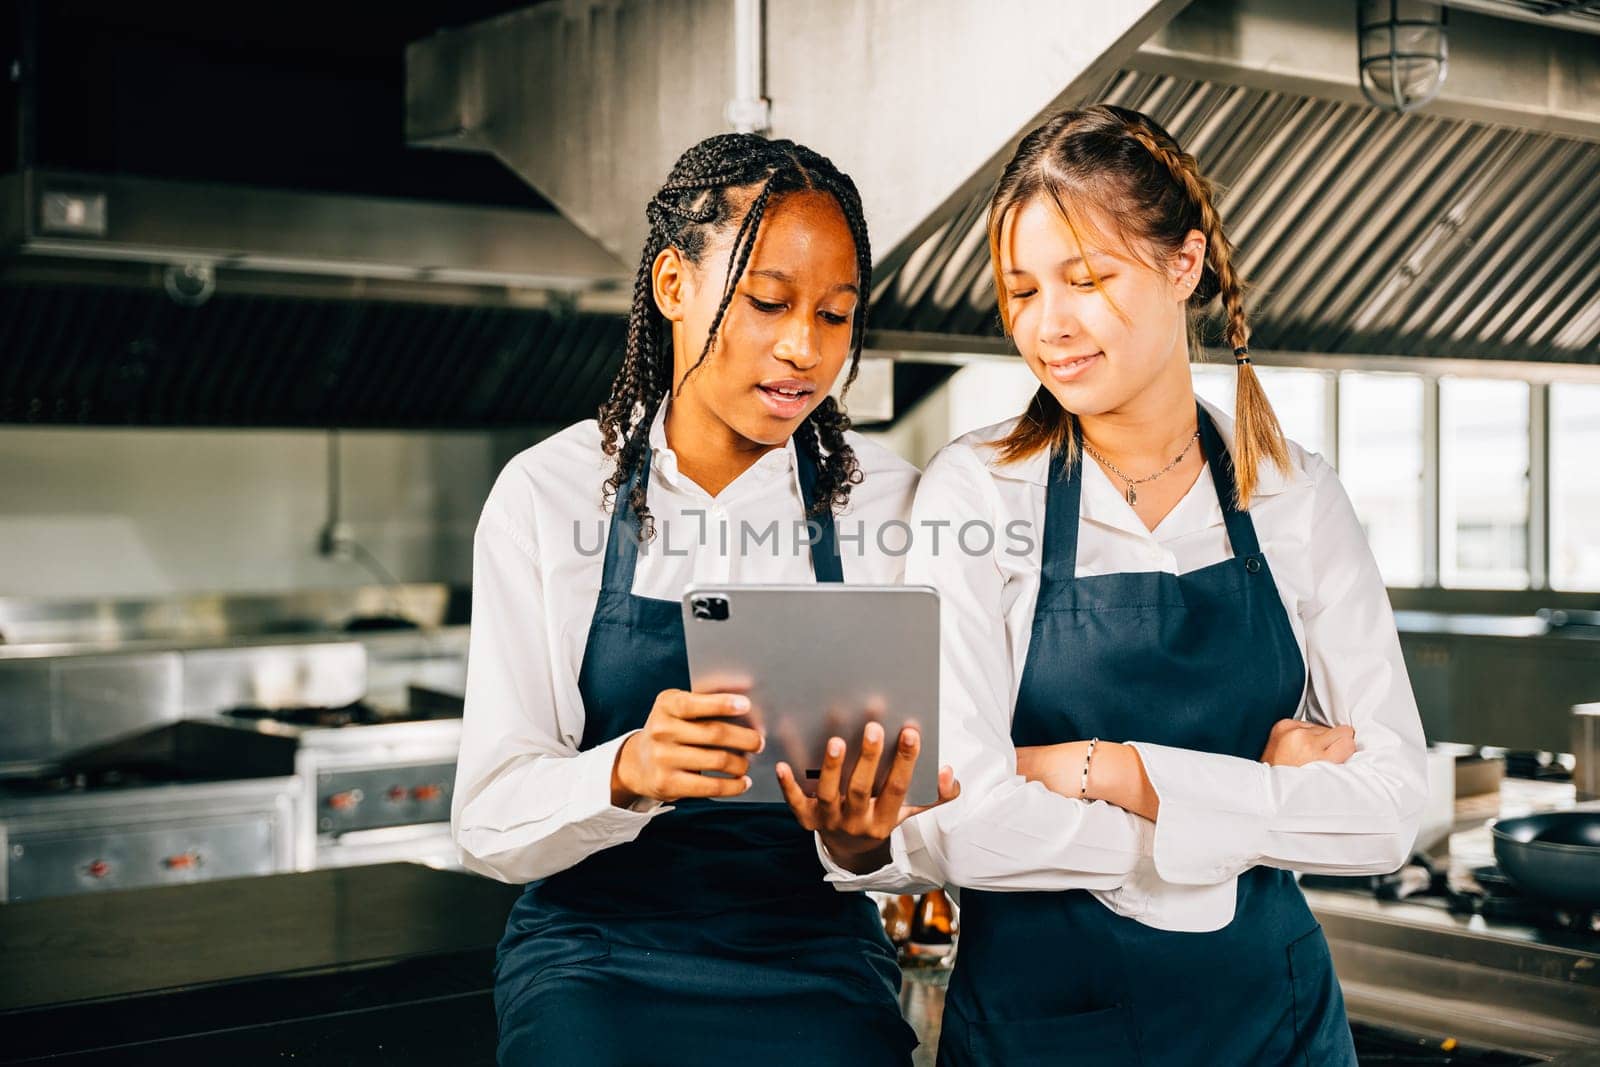 In a professional restaurant kitchen two famous chefs discuss video blog using a tablet. Modern technology aiding discussion colleagues smiling searching reading and connecting. by Sorapop